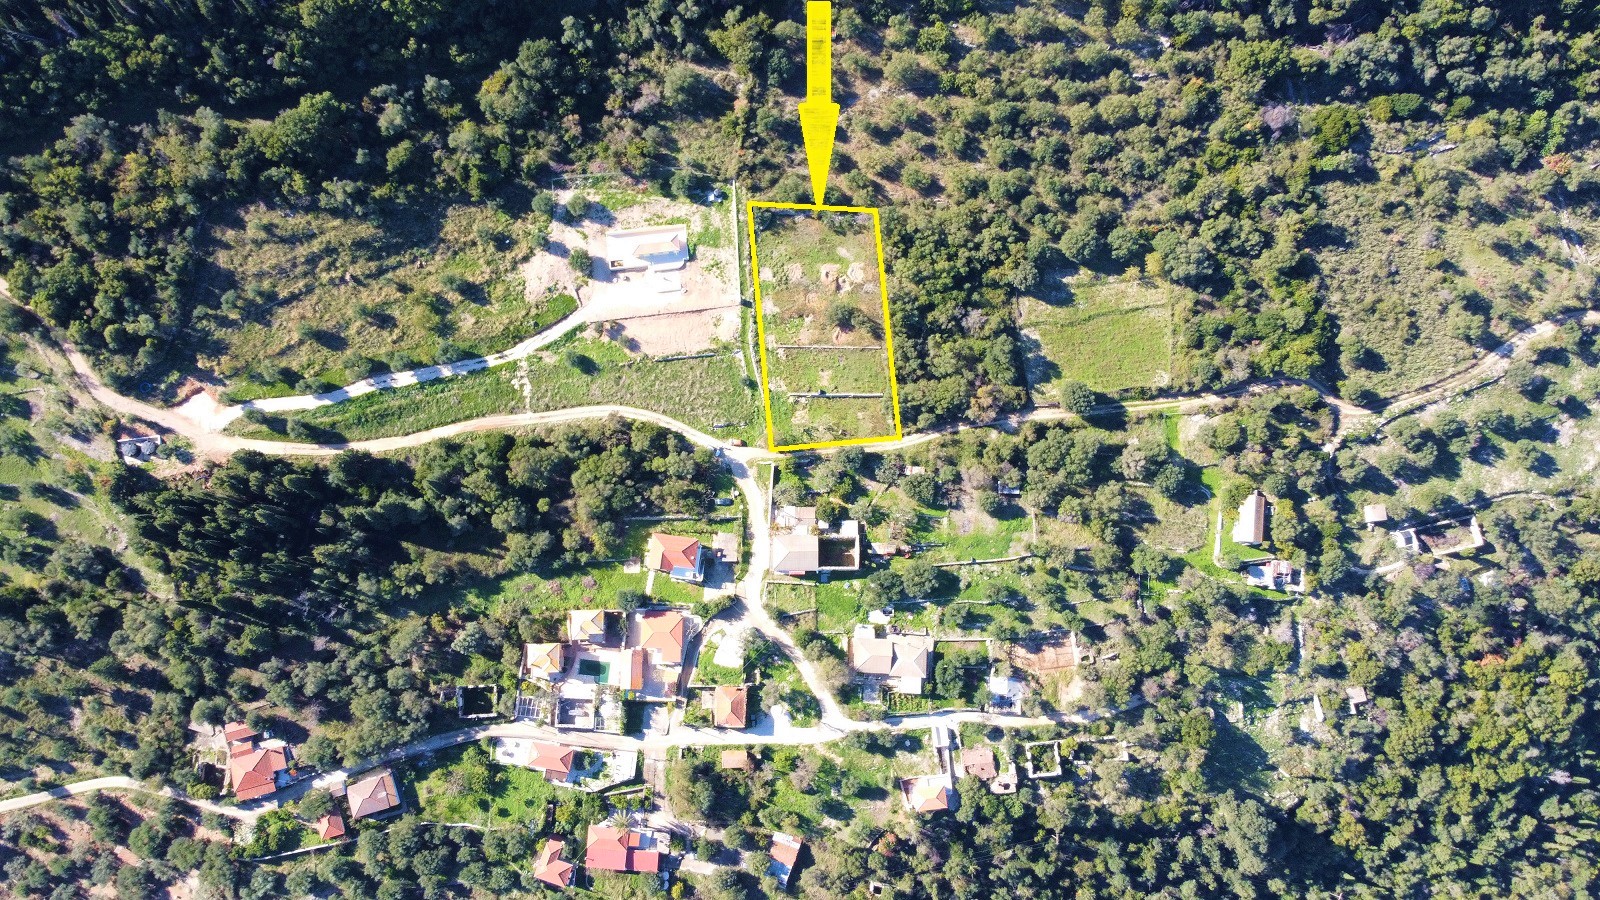 Location and boundaries of land with building license for sale on Ithaca Greece, Kolleri